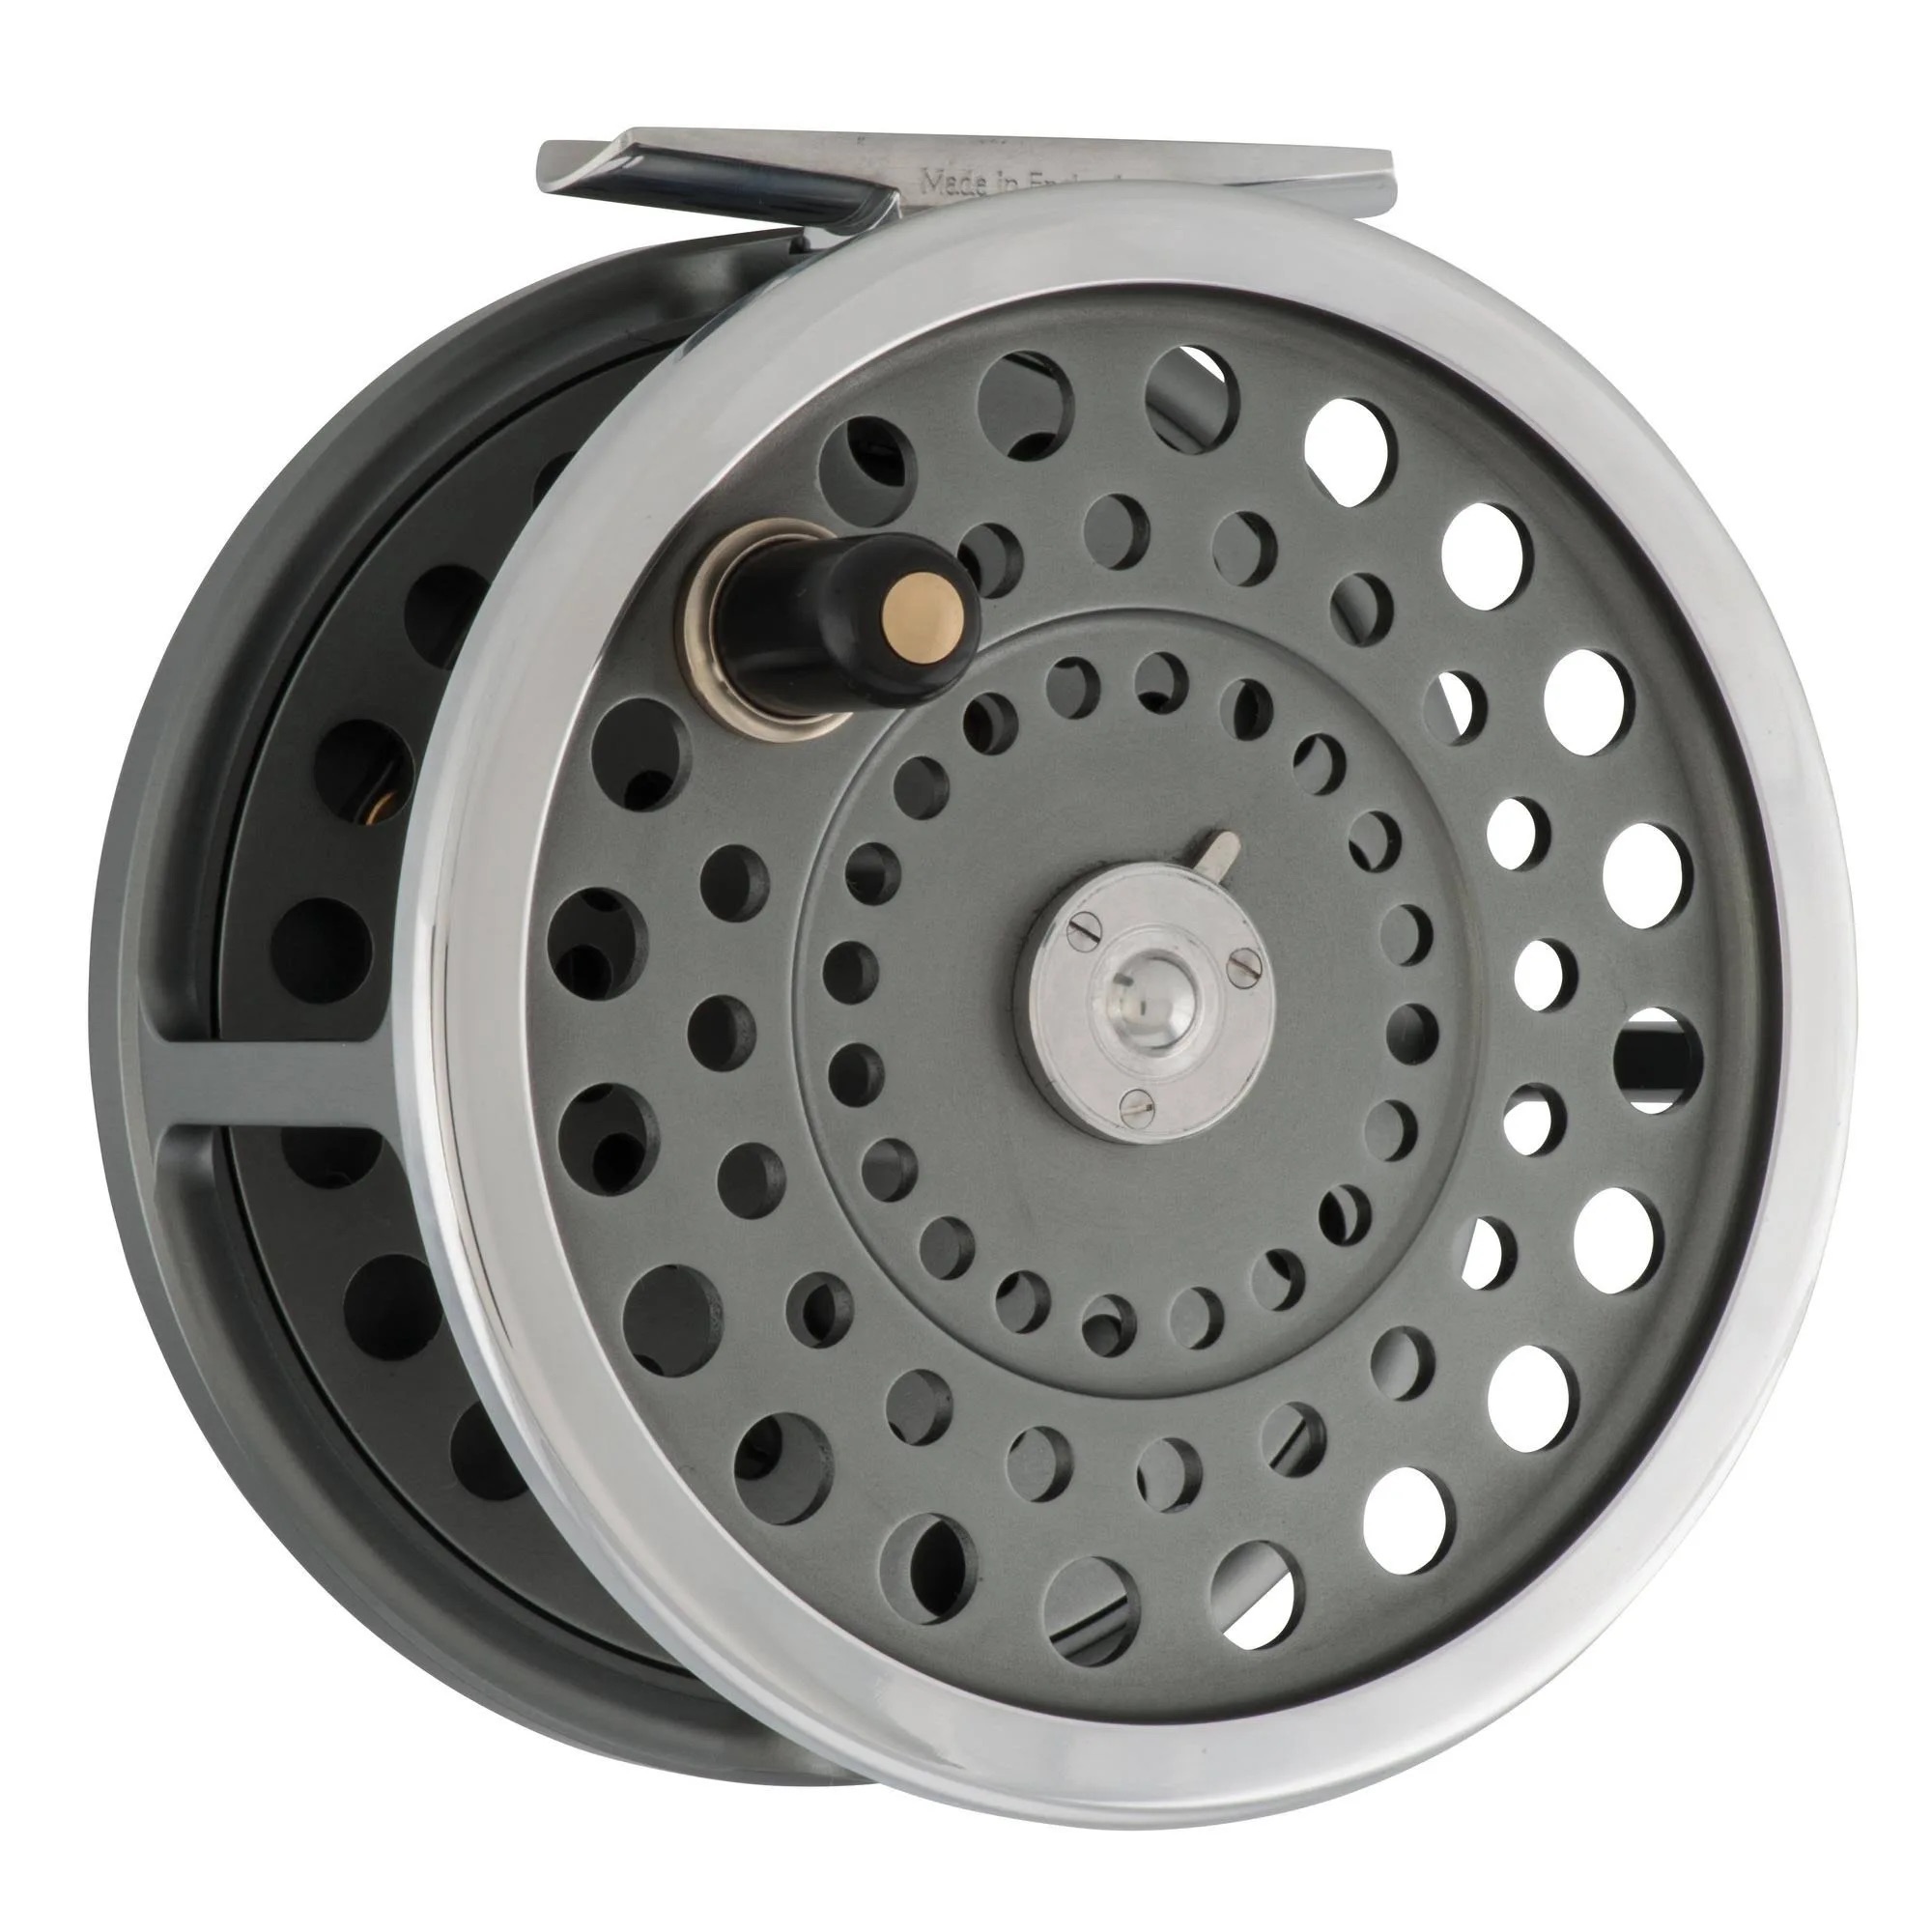 Hardy Marquis Salmon 3 Fly Reel